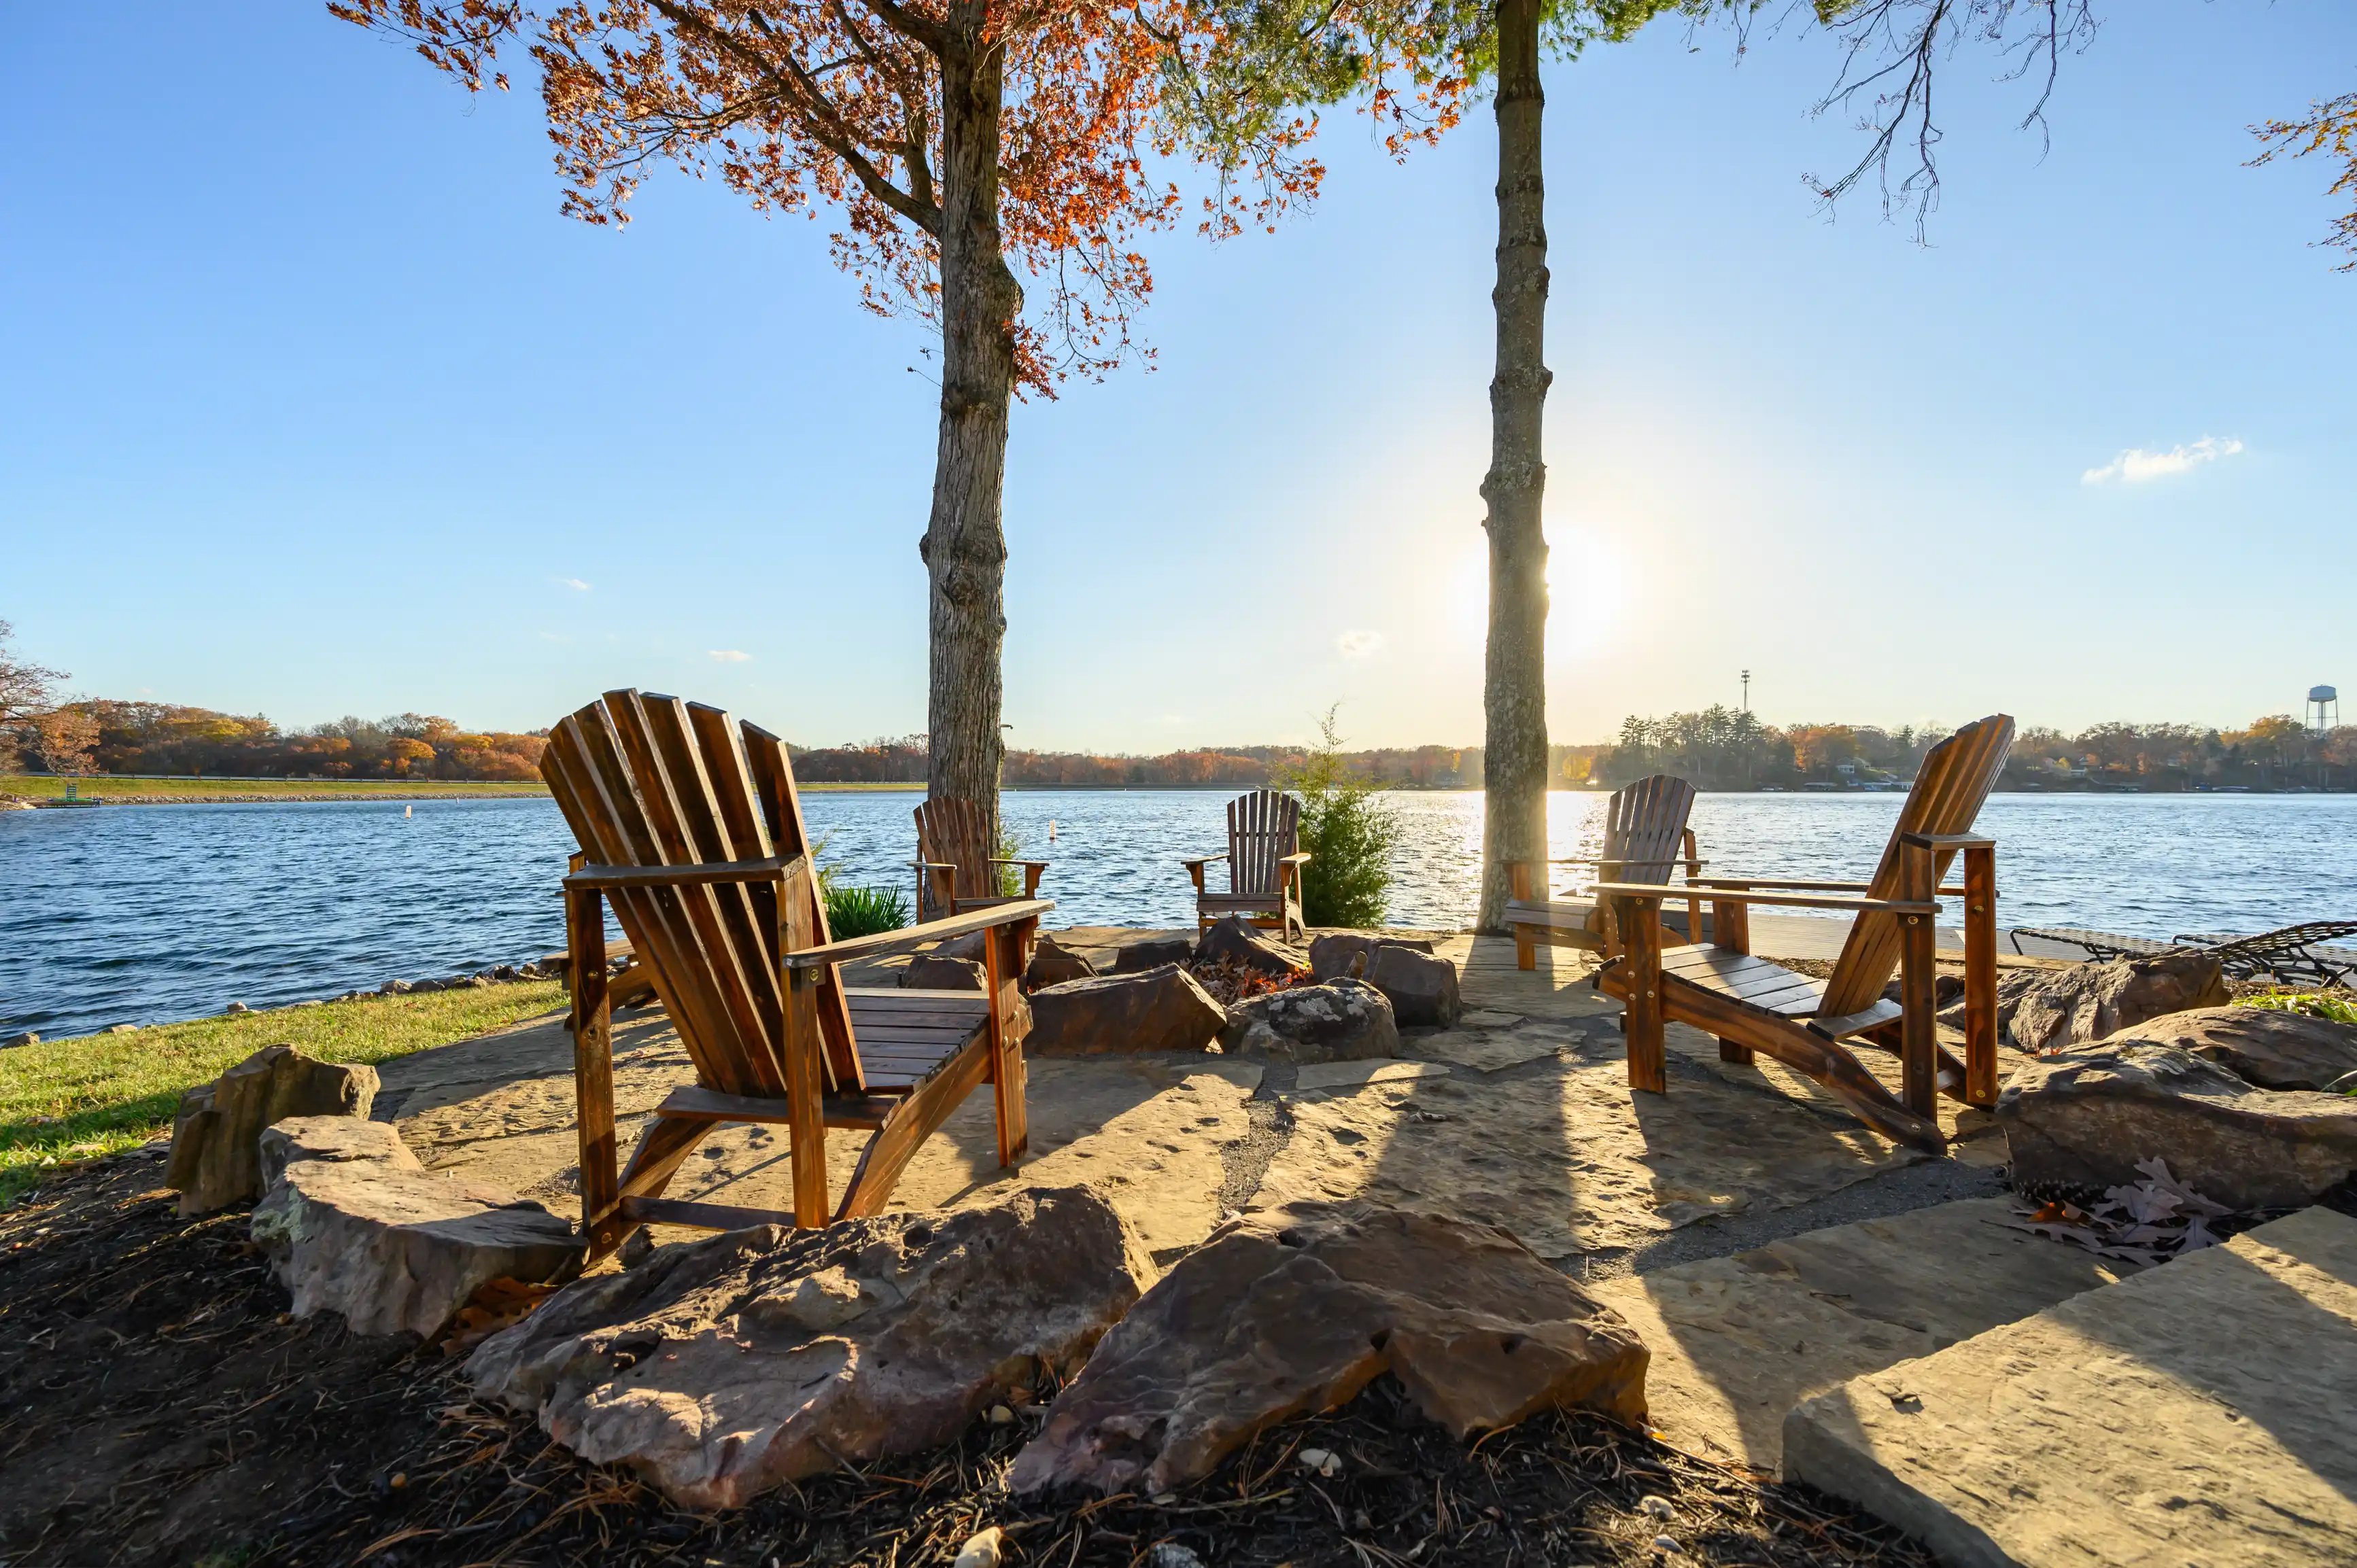 Three wooden Adirondack chairs facing a tranquil lake with a warm sunset backlight, surrounded by autumn colored trees and stone firepit.